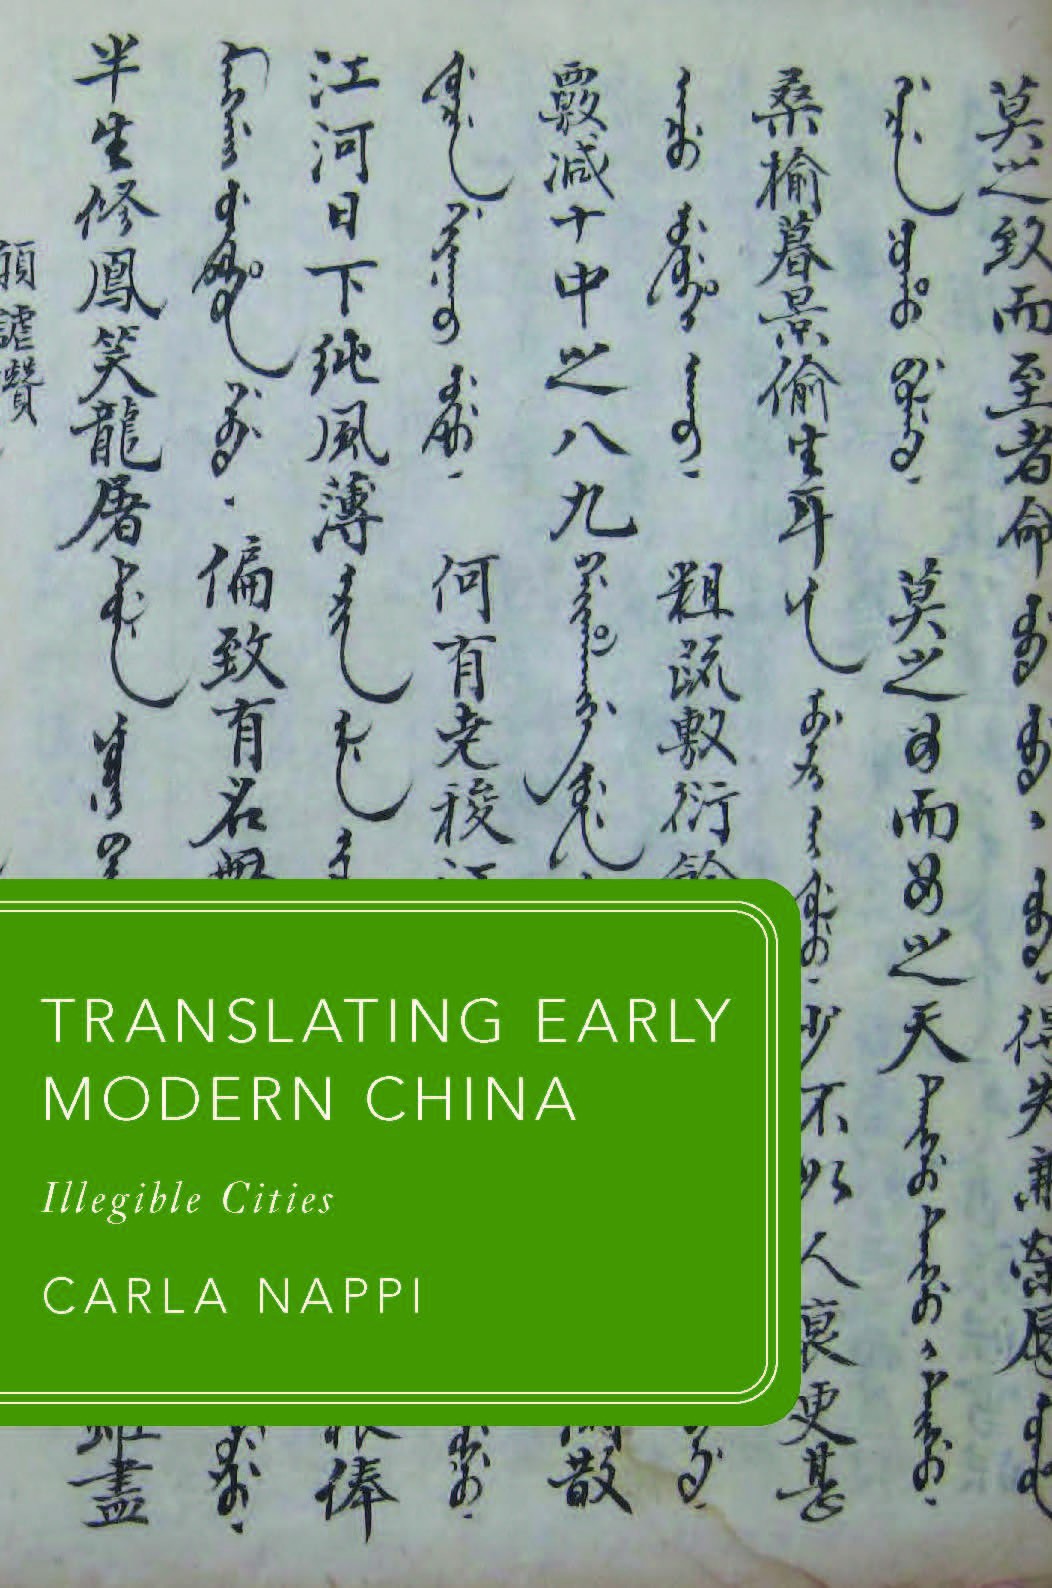 Cover of book featuring Chinese letters and title